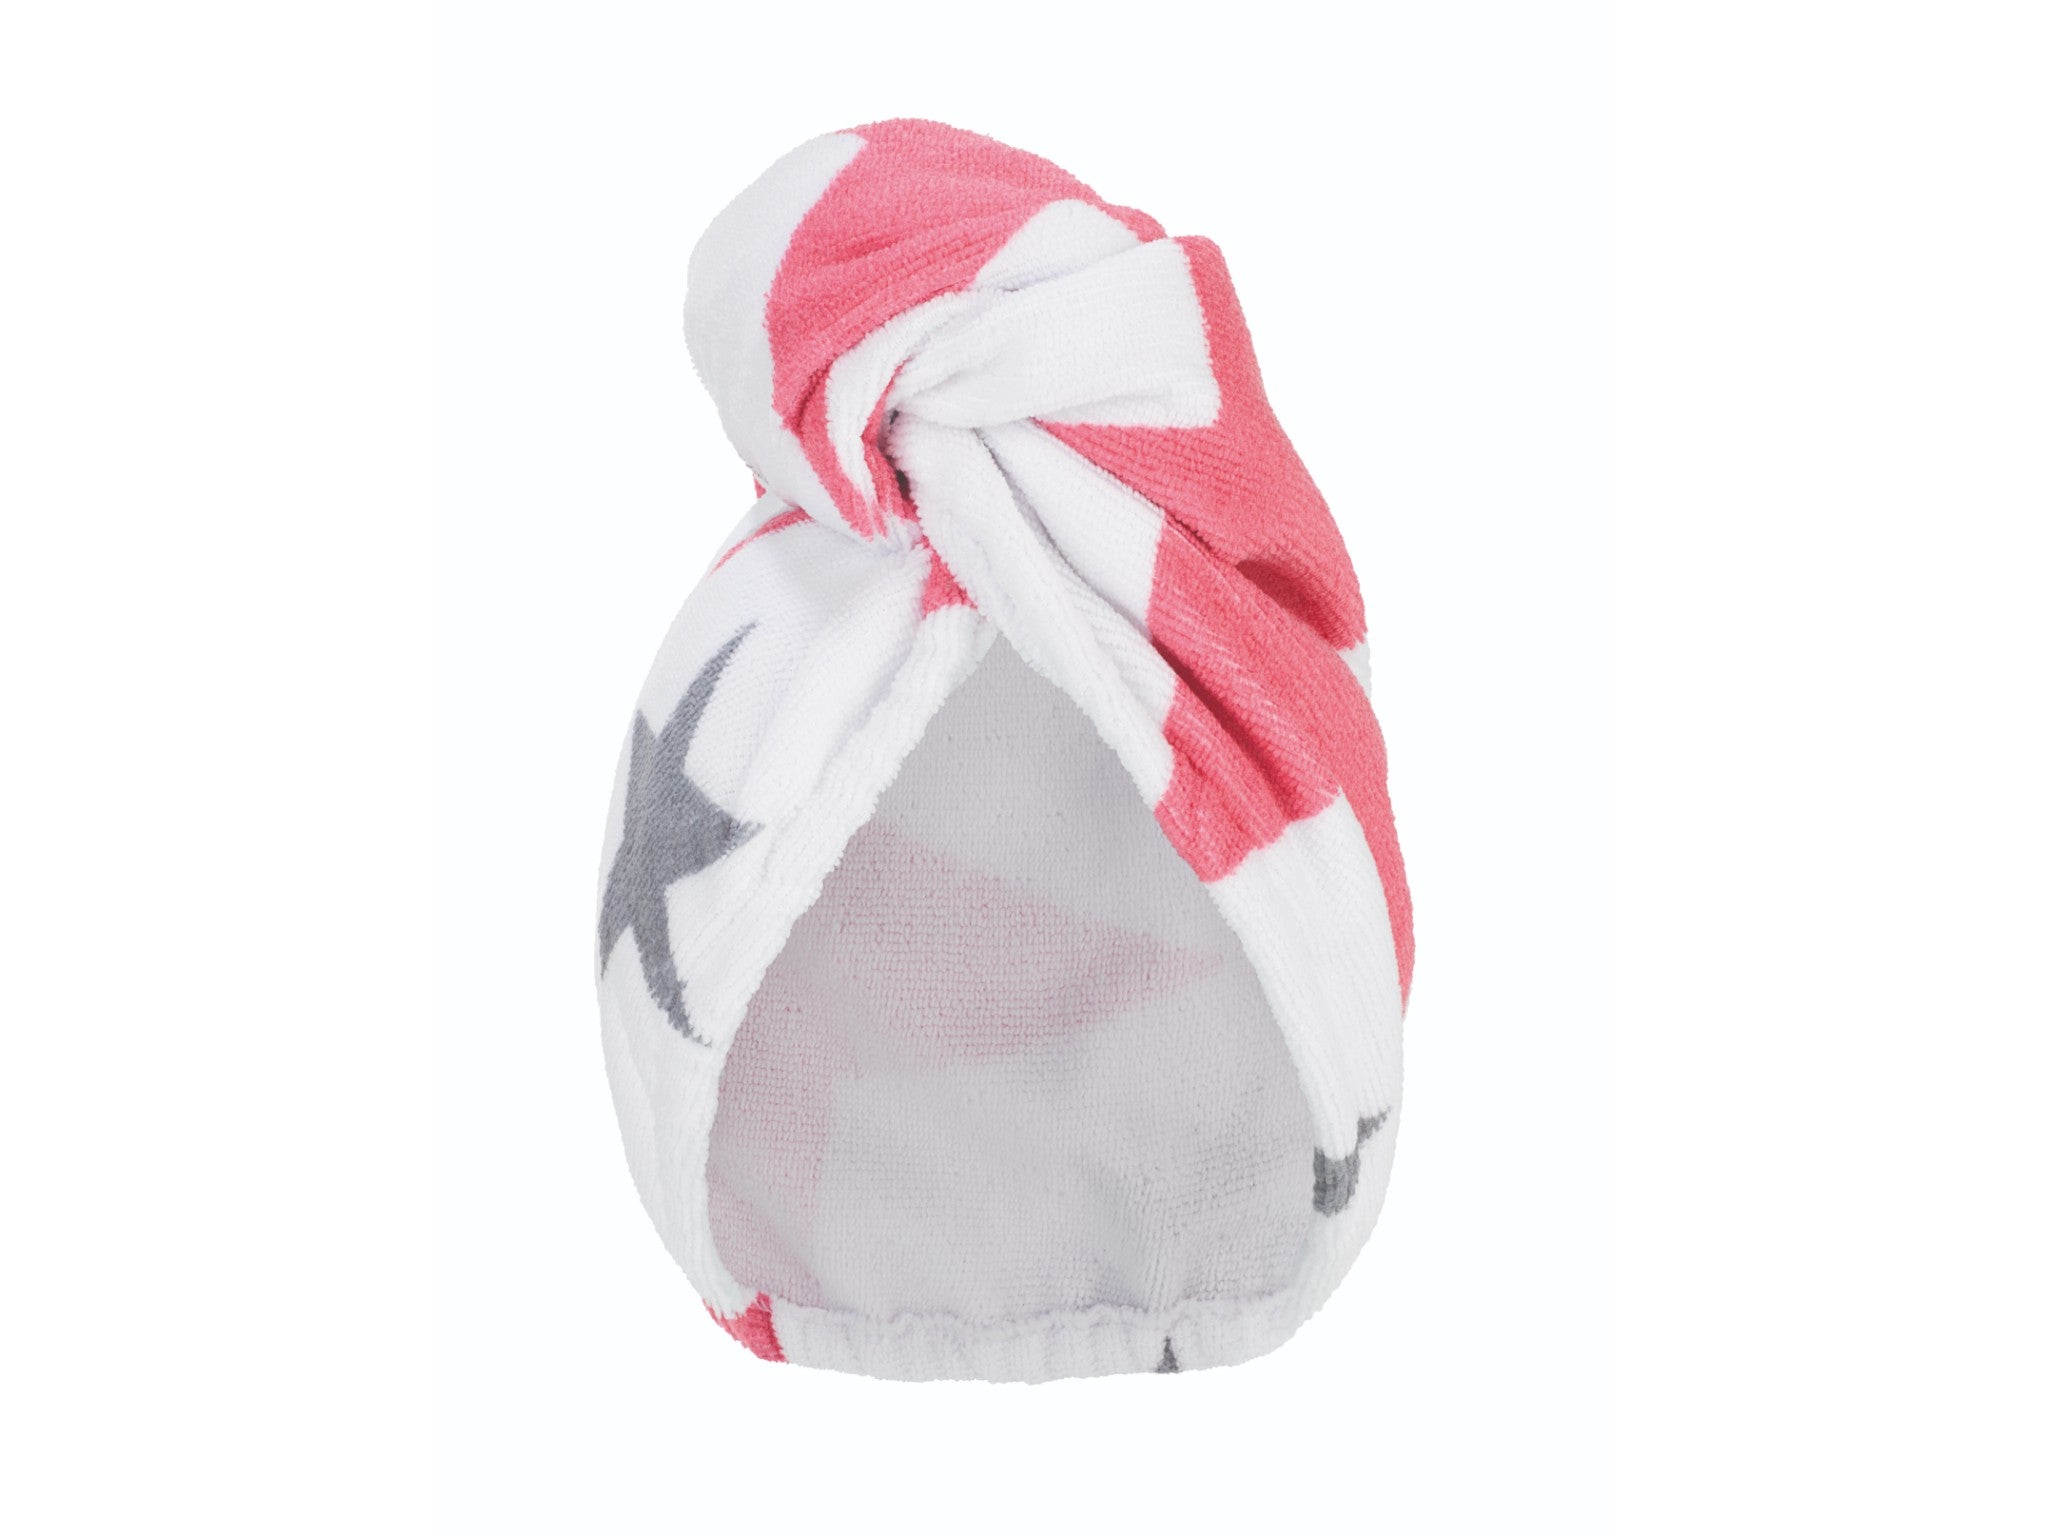 Soap & Glory quick drying hair turban indybest.jpg